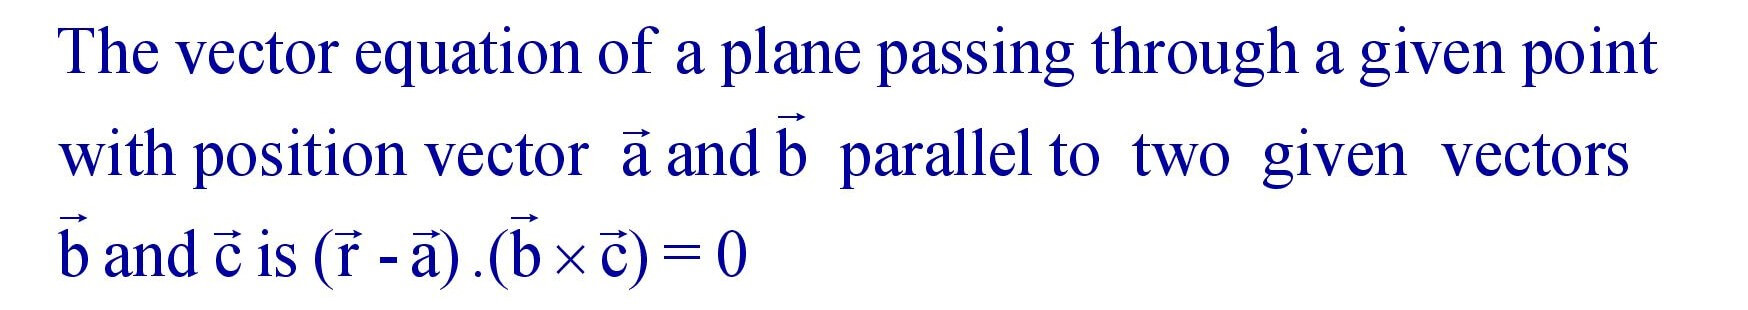 Equation of a plane passing through a given point and parallel to two given lines